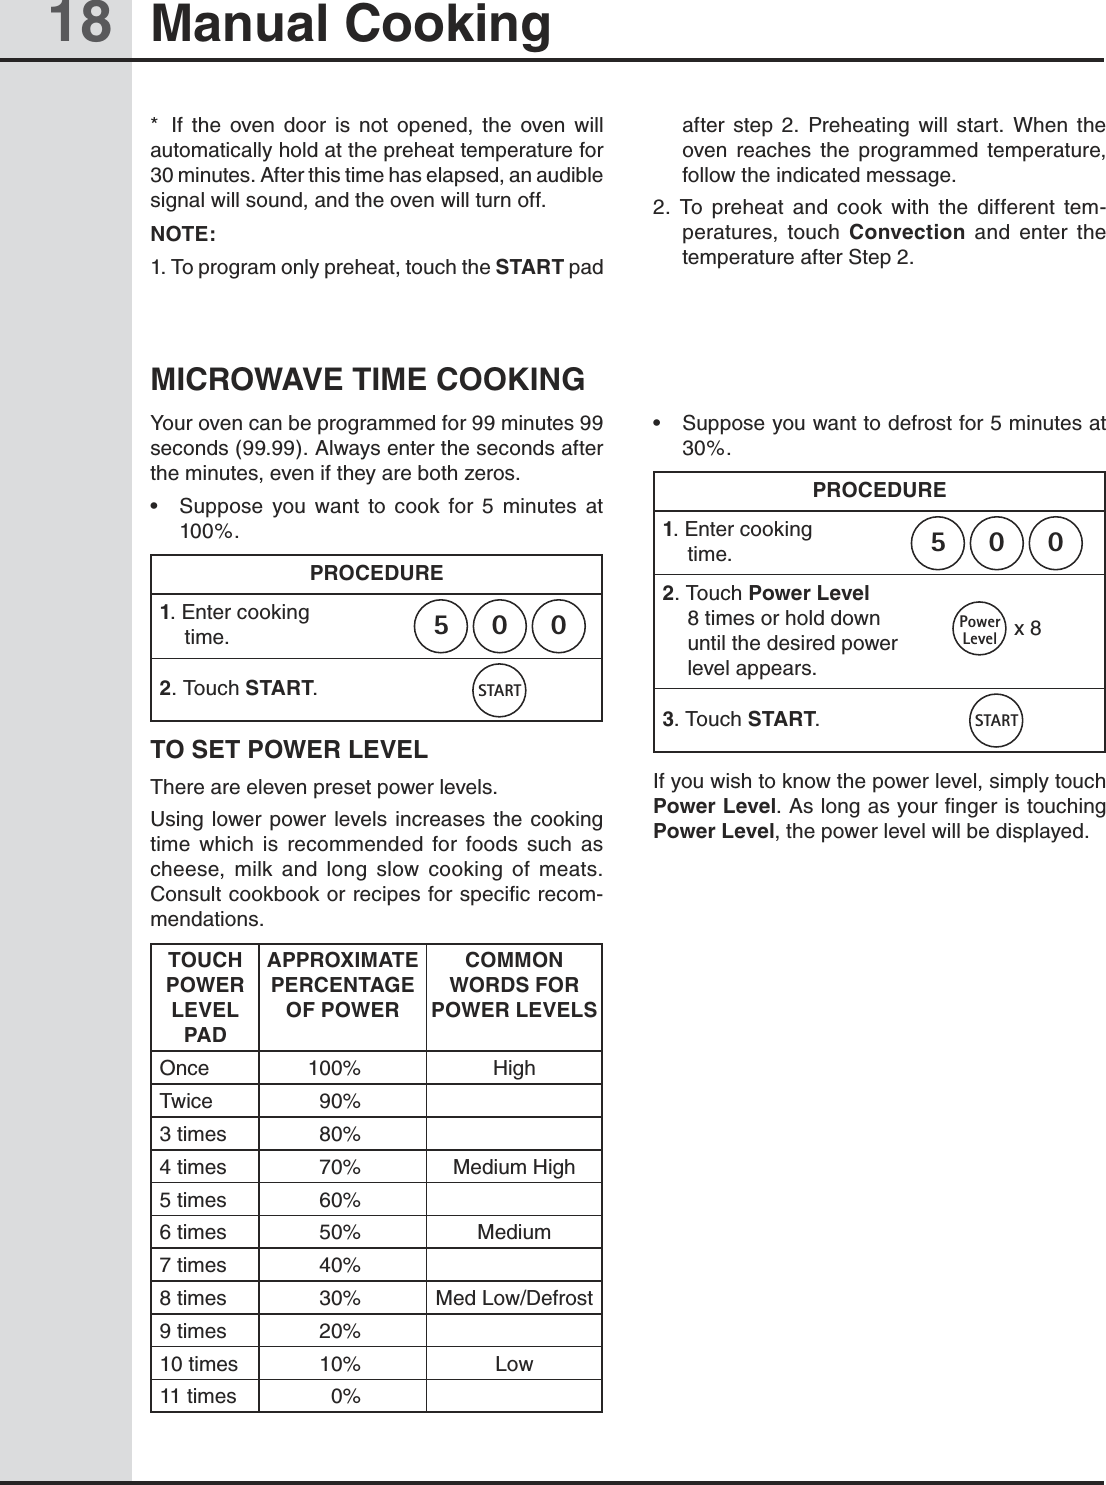 18 Manual CookingMICROWAVE TIME COOKINGYour oven can be programmed for 99 minutes 99 seconds (99.99). Always enter the seconds after the minutes, even if they are both zeros.•  Suppose  you  want  to  cook  for  5  minutes  at 100%.PROCEDURE1. Enter cooking                   time.2. Touch START. TO SET POWER LEVELThere are eleven preset power levels.Using  lower power levels increases  the cooking time  which  is  recommended  for  foods  such  as cheese,  milk  and  long  slow  cooking  of  meats. Consult cookbook or recipes for specific recom-mendations.TOUCH POWER LEVEL PADAPPROXIMATE PERCENTAGE OF POWER COMMON WORDS FOR POWER LEVELSOnce   100% HighTwice   90%3 times   80%4 times   70% Medium High5 times   60%6 times   50% Medium7 times   40%8 times   30% Med Low/Defrost9 times   20%10 times   10% Low11 times   0%•  Suppose you want to defrost for 5 minutes at 30%.PROCEDURE1. Enter cooking                   time.2. Touch Power Level 8 times or hold down until the desired power level appears.3. Touch START. If you wish to know the power level, simply touch Power Level. As long as your finger is touching Power Level, the power level will be displayed.*  If  the  oven  door  is  not  opened,  the  oven  will automatically hold at the preheat temperature for 30 minutes. After this time has elapsed, an audible signal will sound, and the oven will turn off.NOTE:1. To program only preheat, touch the START pad after  step  2.  Preheating  will  start.  When  the oven  reaches  the  programmed  temperature, follow the indicated message.2.  To  preheat  and  cook  with  the  different  tem-peratures,  touch  Convection  and  enter  the temperature after Step 2. 005START005STARTx 8PowerLevel